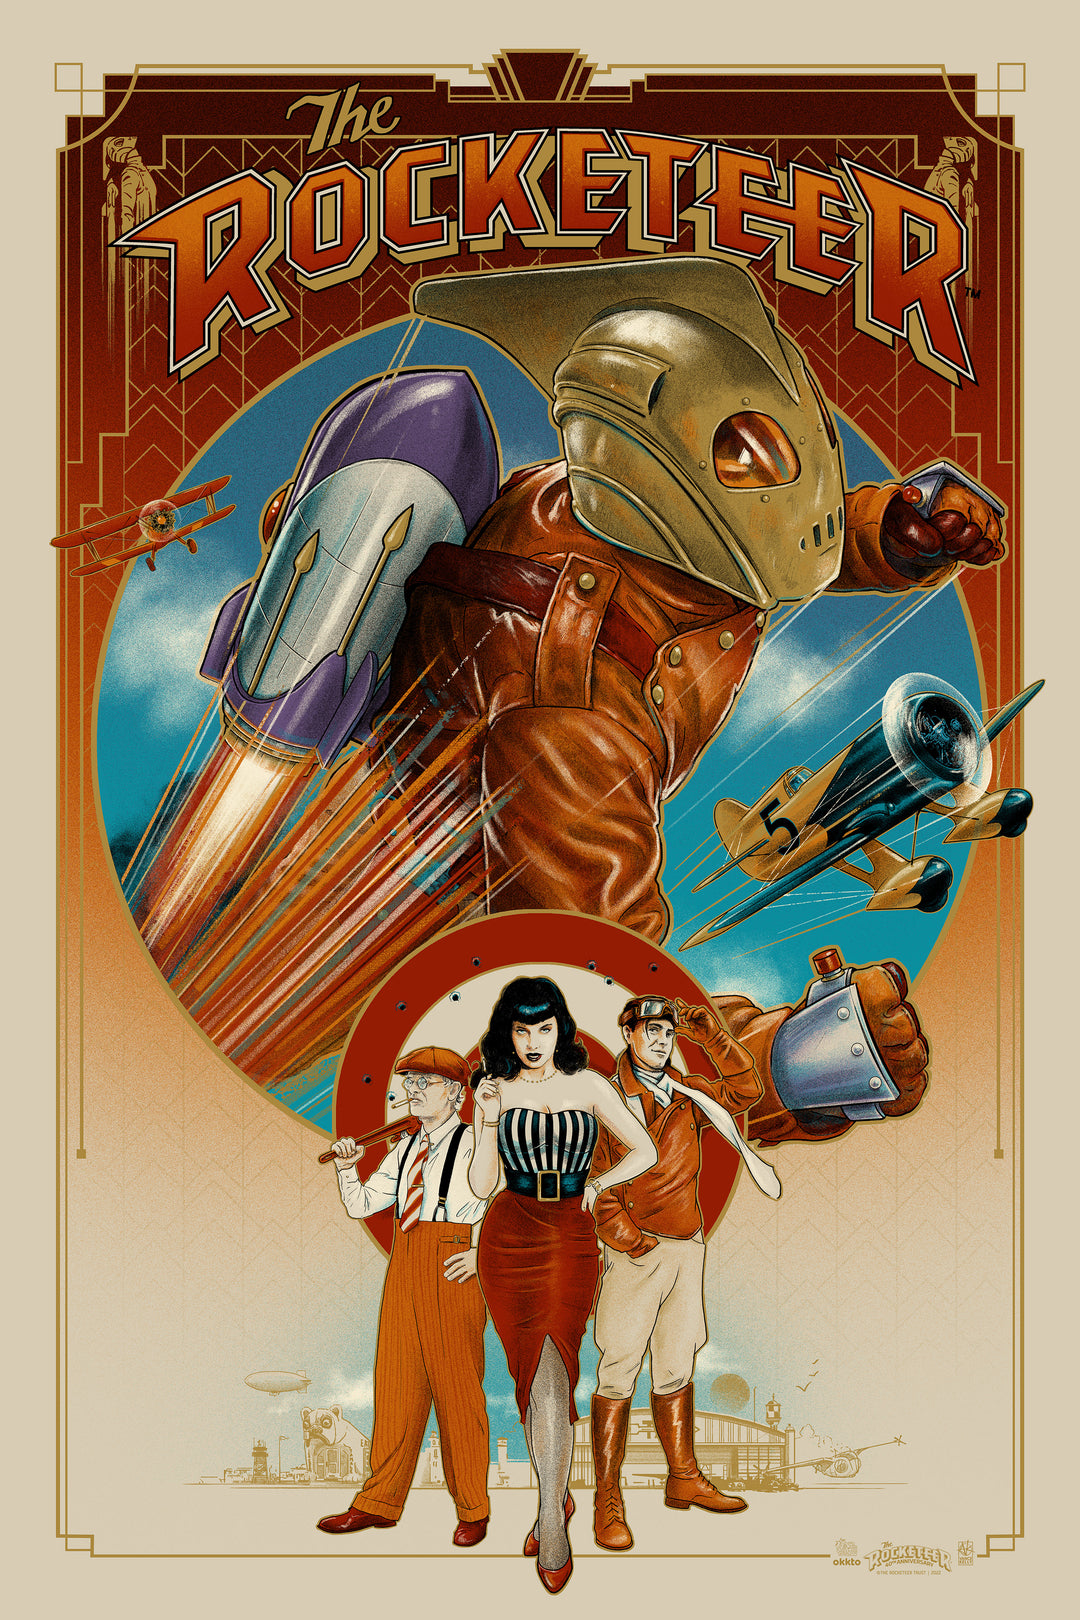 The Rocketeer 40th Anniversary Poster by Vance Kelly